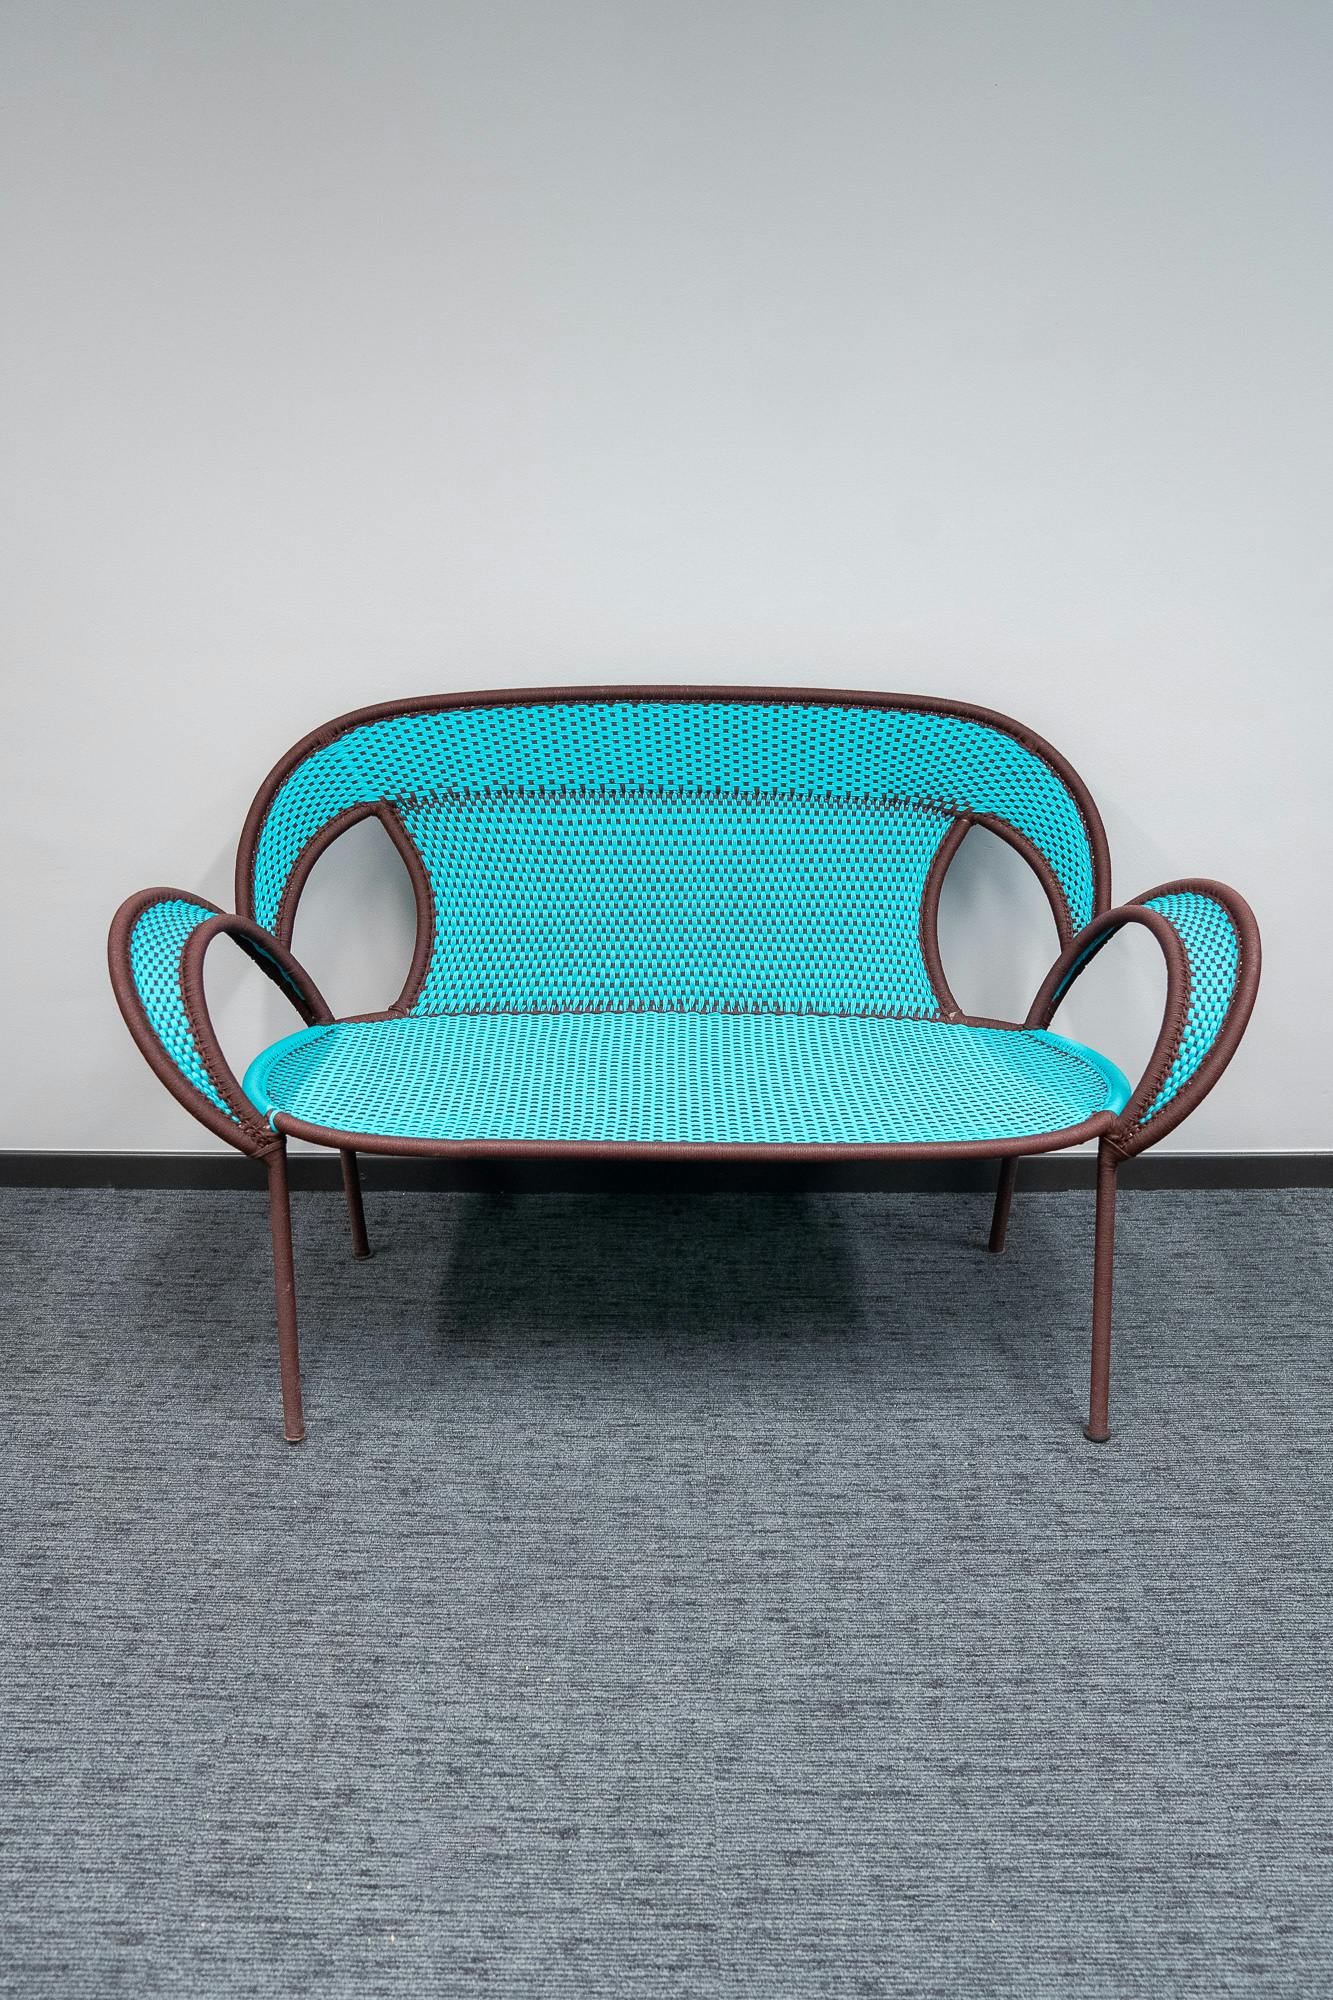 Turquoise and brown wicker sofa - Second hand quality "Armchairs and Couches" - Relieve Furniture